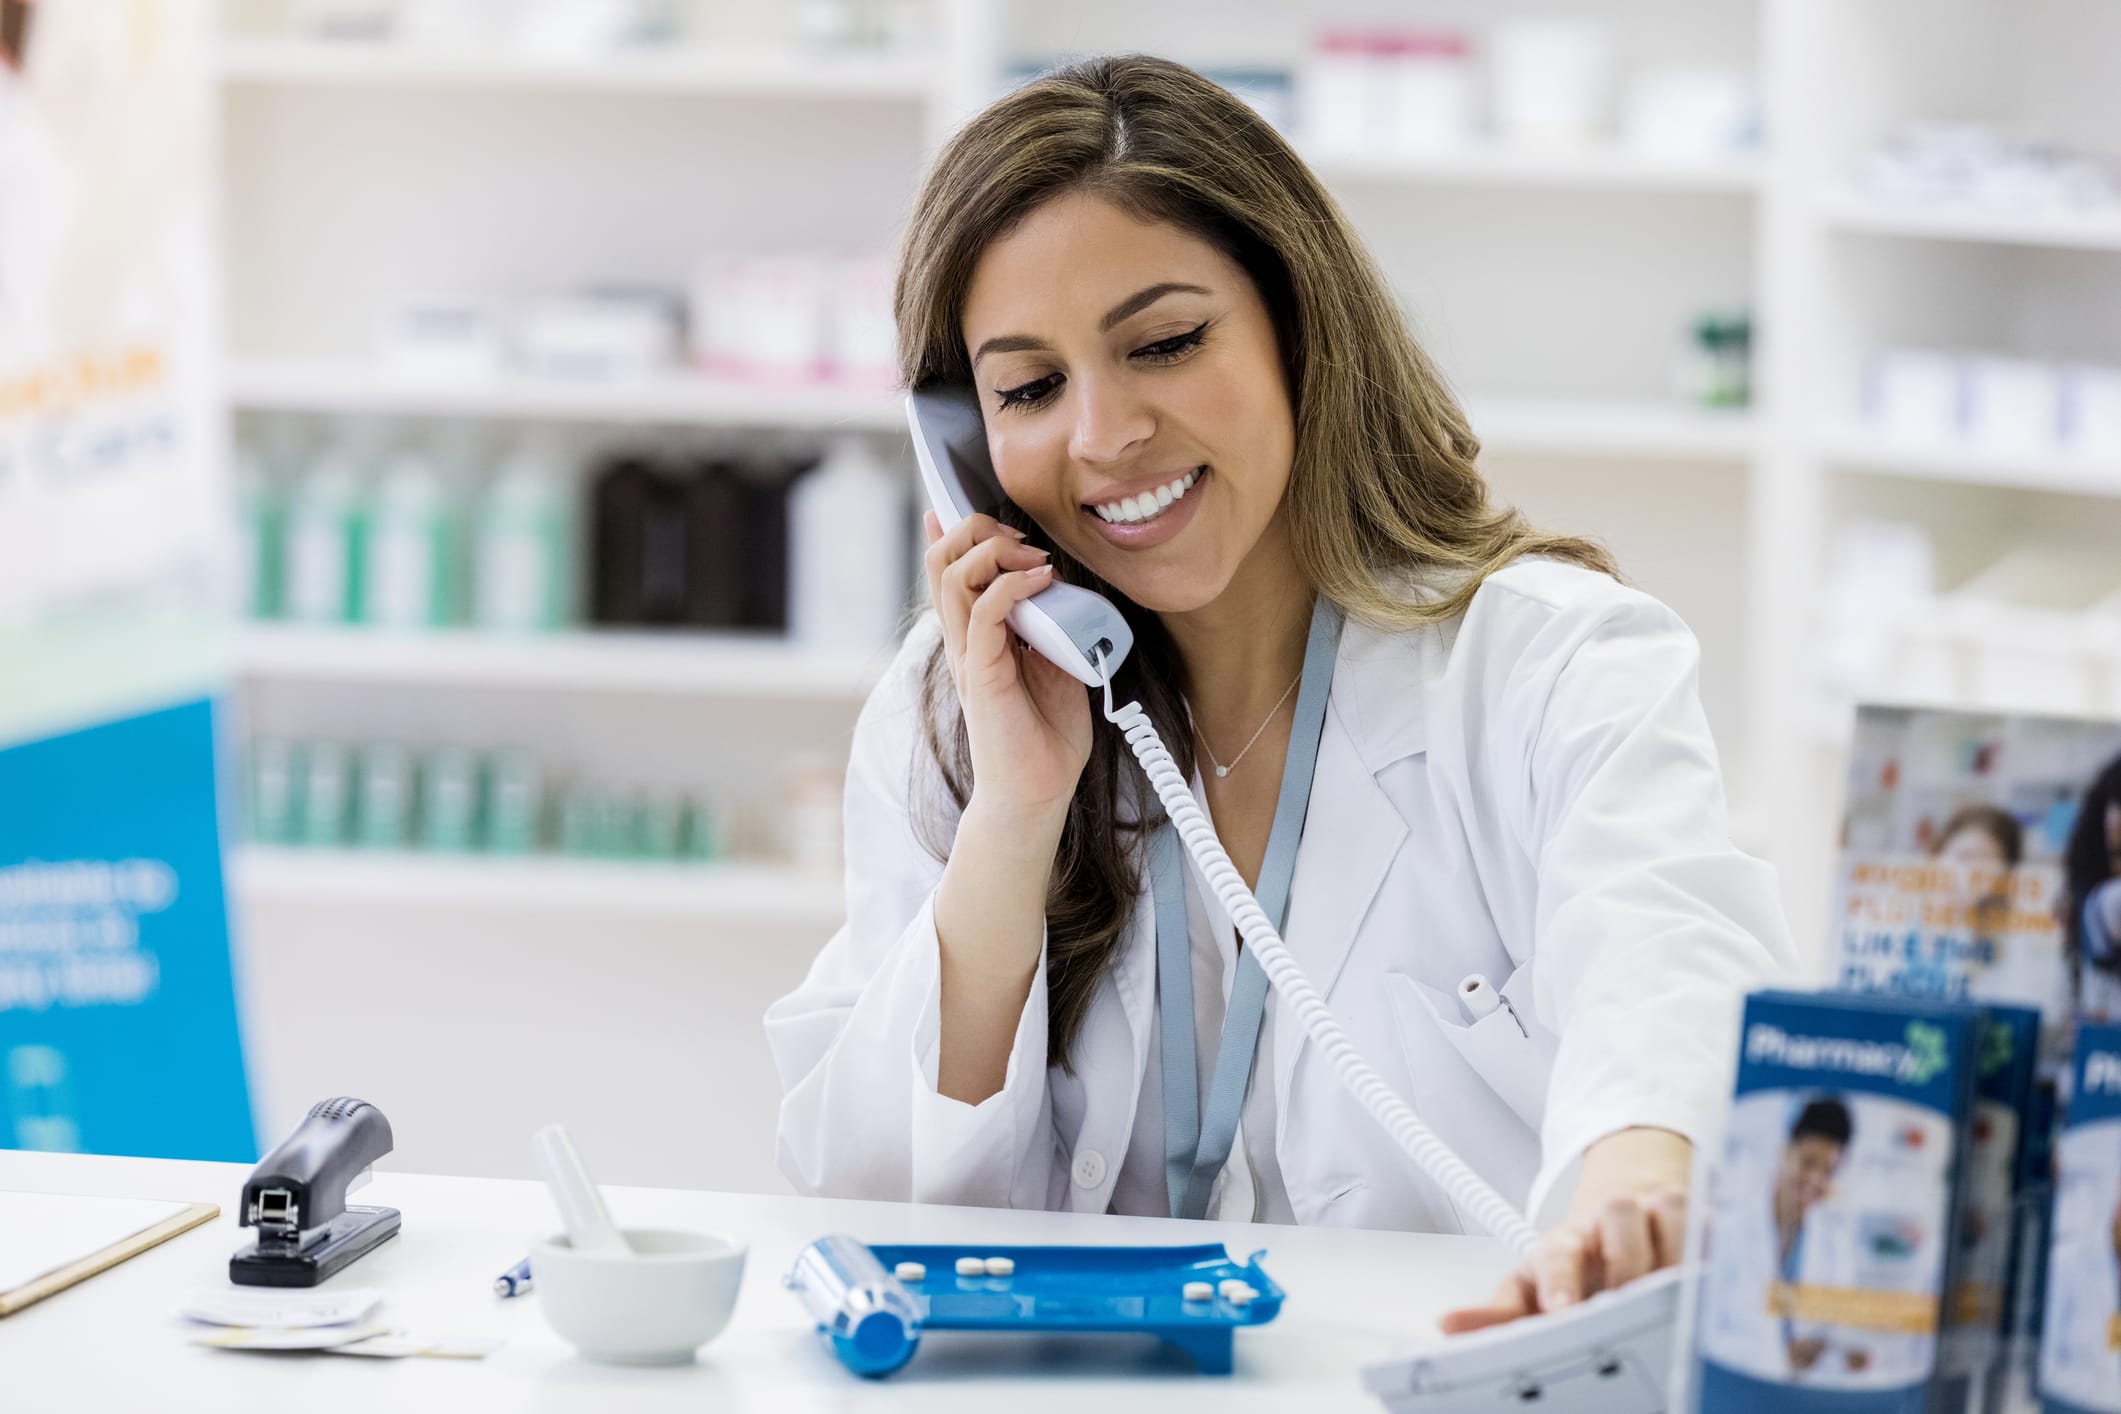 Woman in medical coat on phone in a medical office